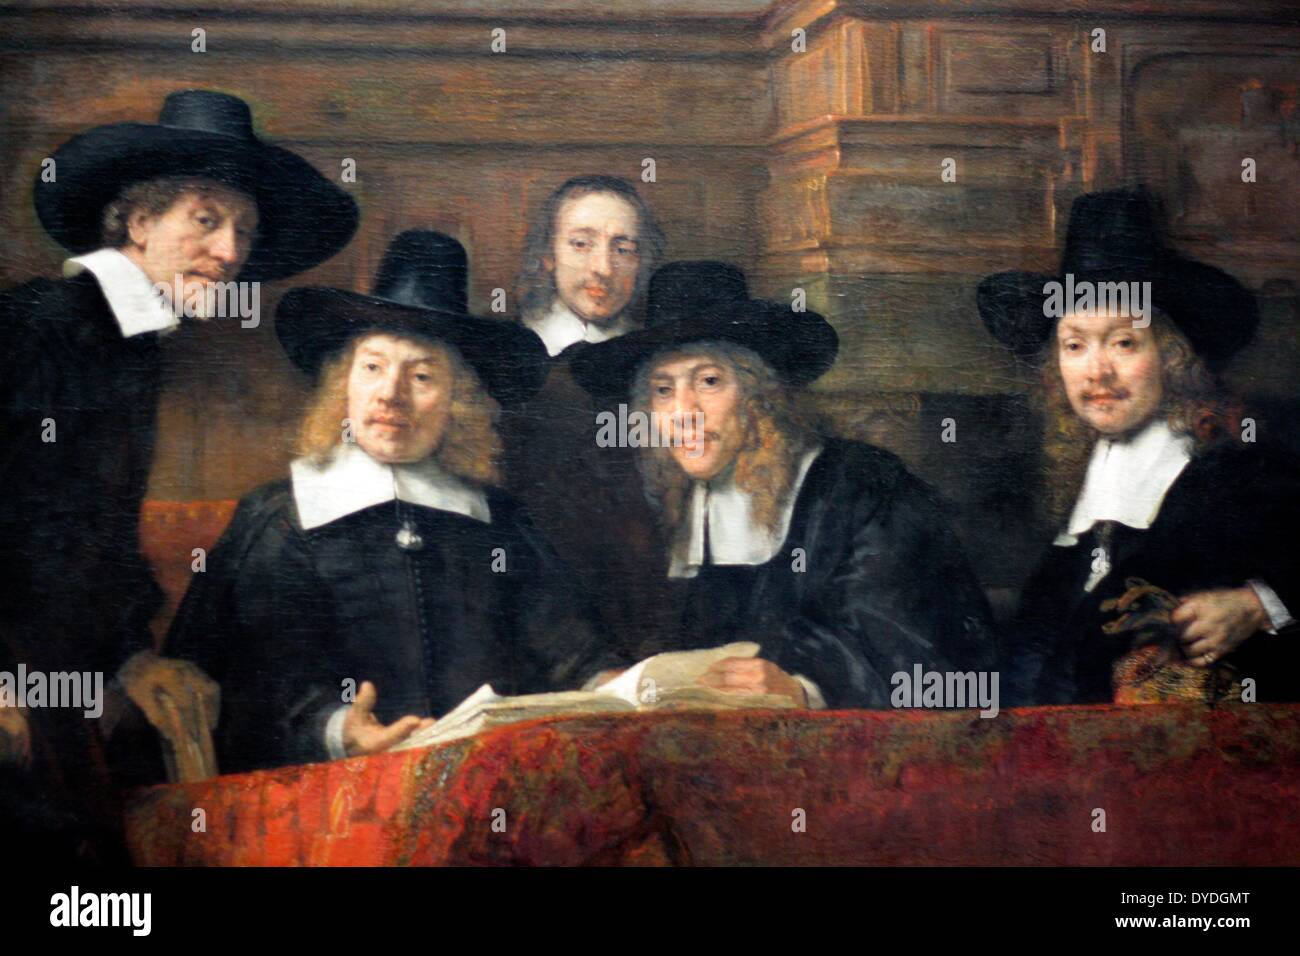 The Wardens of the Amsterdam Drapers' Guild, known as 'The Syndics' by Rembrandt Harmenszoon van Rijn (1606-1669). Oil on canvas, 1662. The syndics inspected the quality of dyed cloth. This work not only attests to Rembrandt's endless creativity, but also to his undiminished popularity among the citizens of Amsterdam. Stock Photo